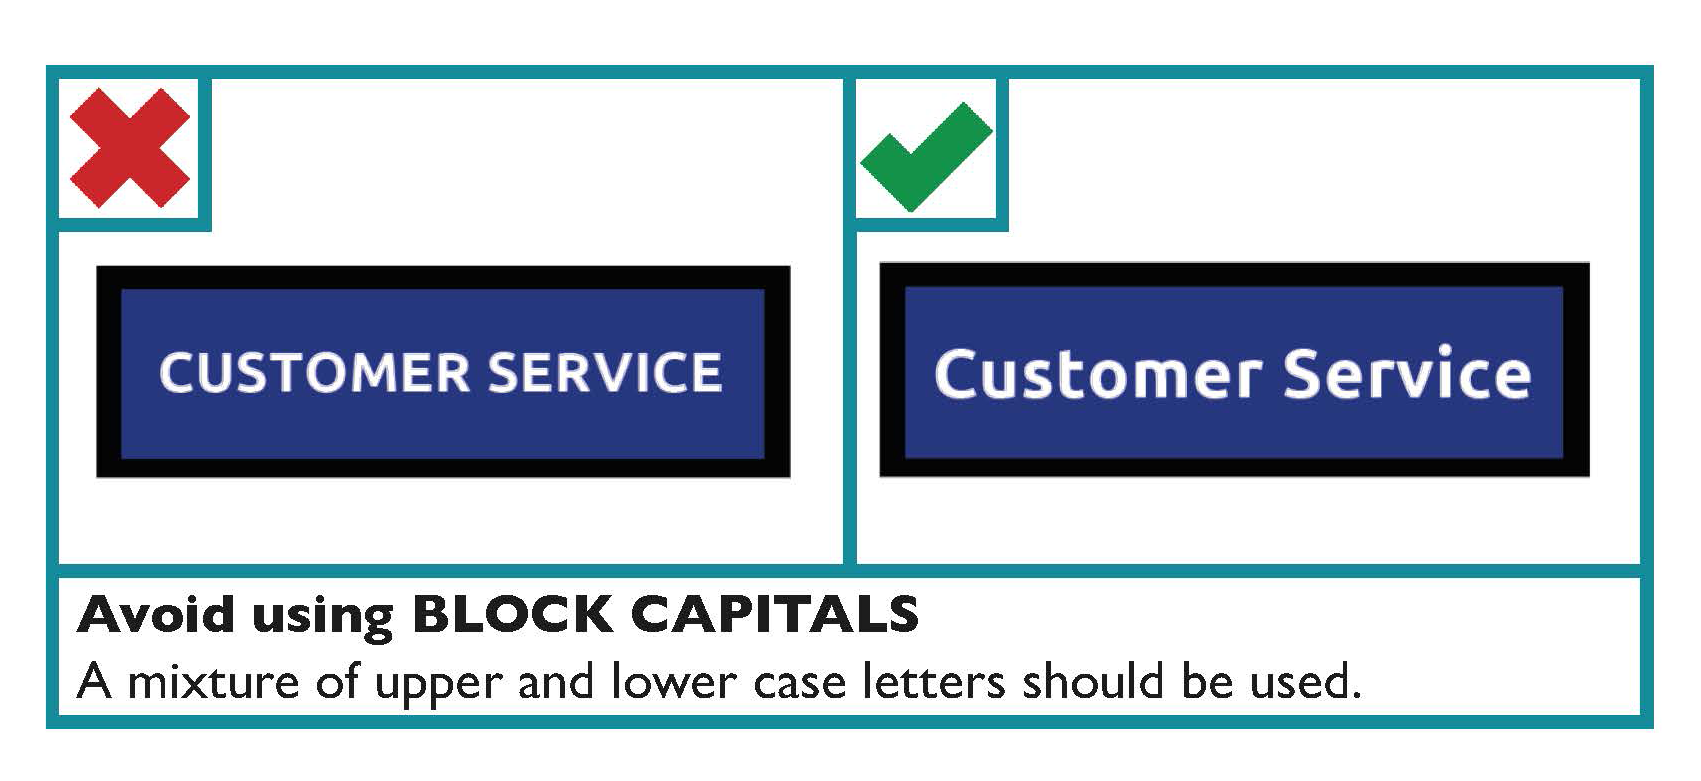 Avoid using block capitals. A mixture of upper and lower case letter should be used.